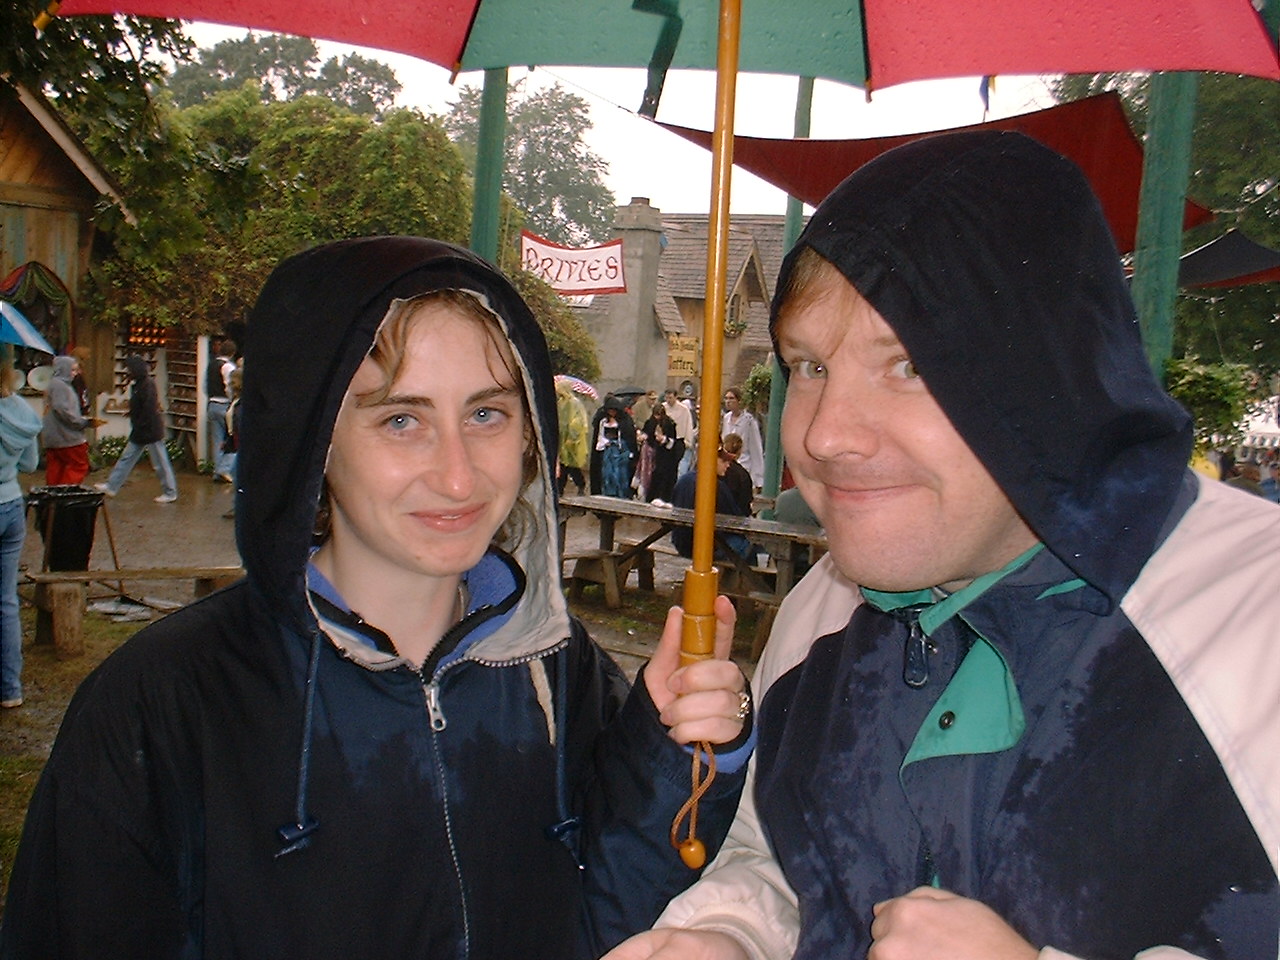 Amy and Vance
after it started raining